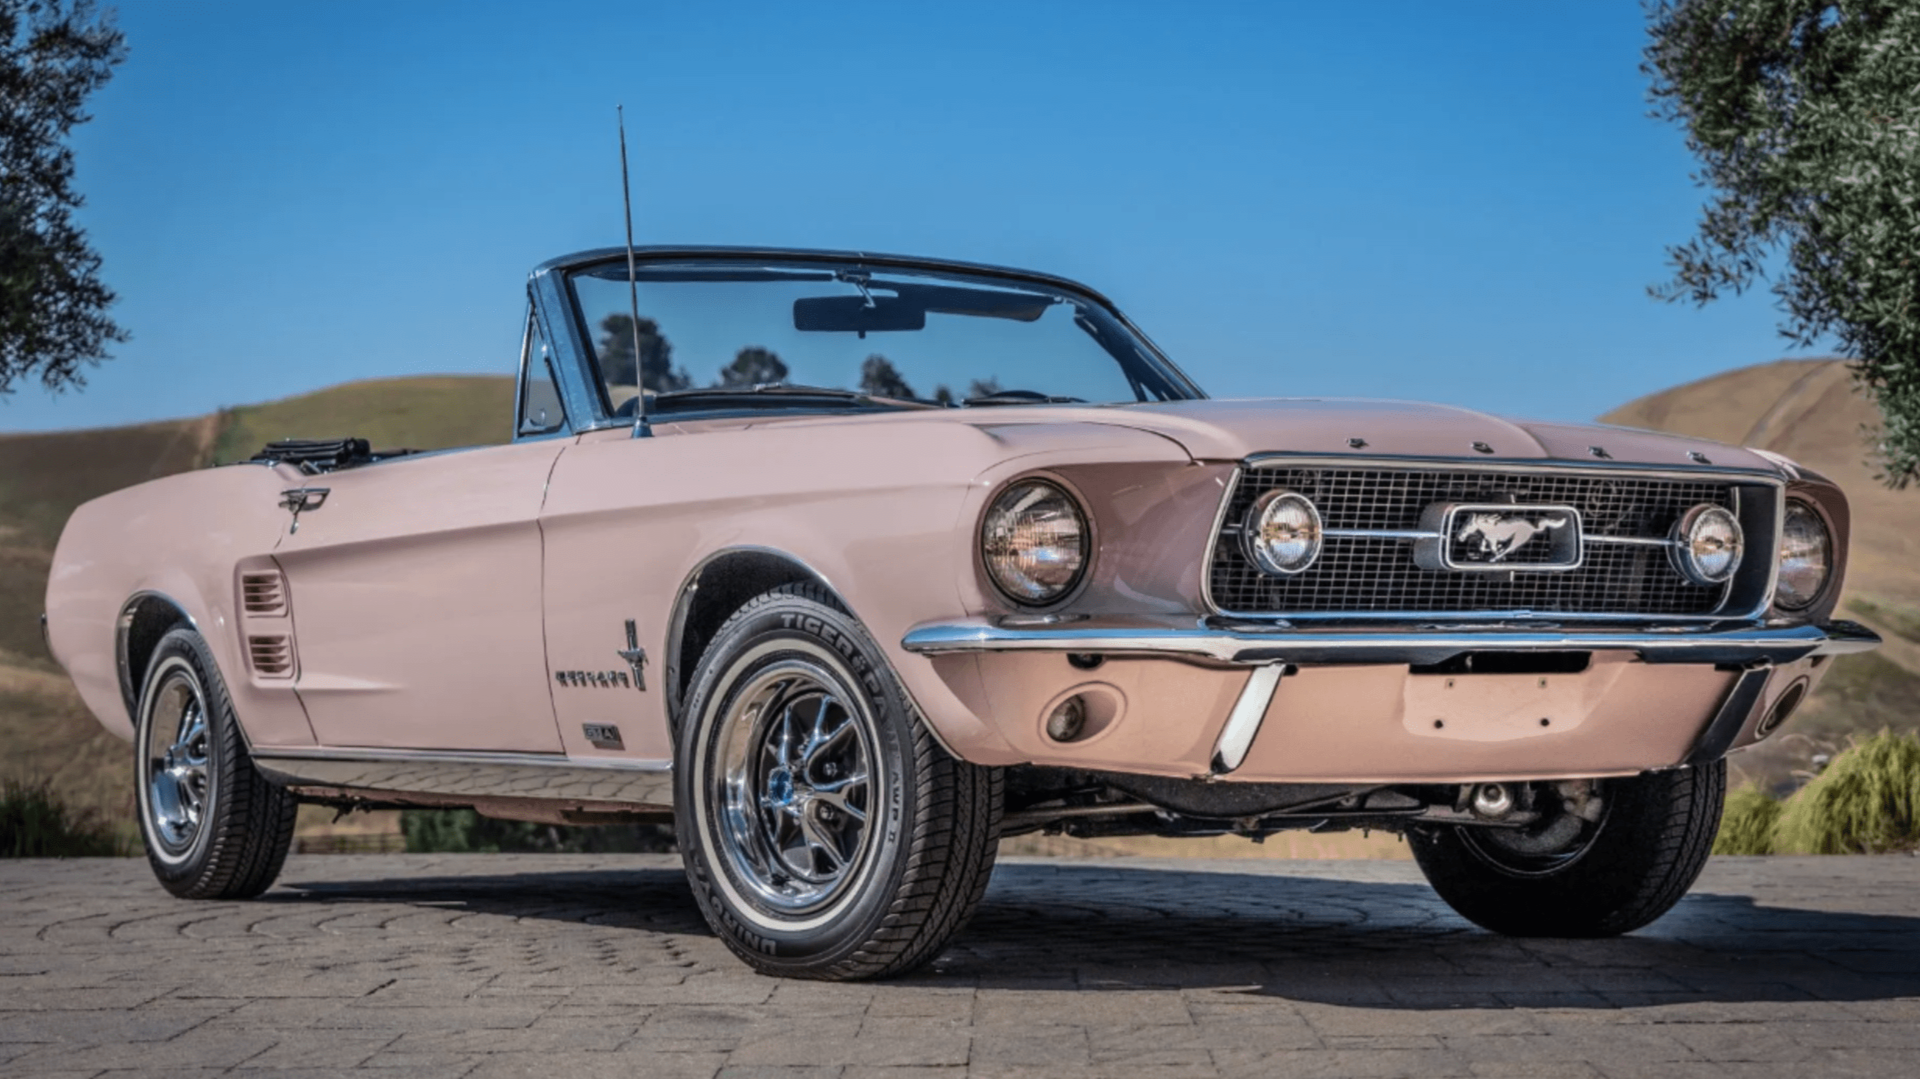 1967 Ford Mustang Convertible muscle car